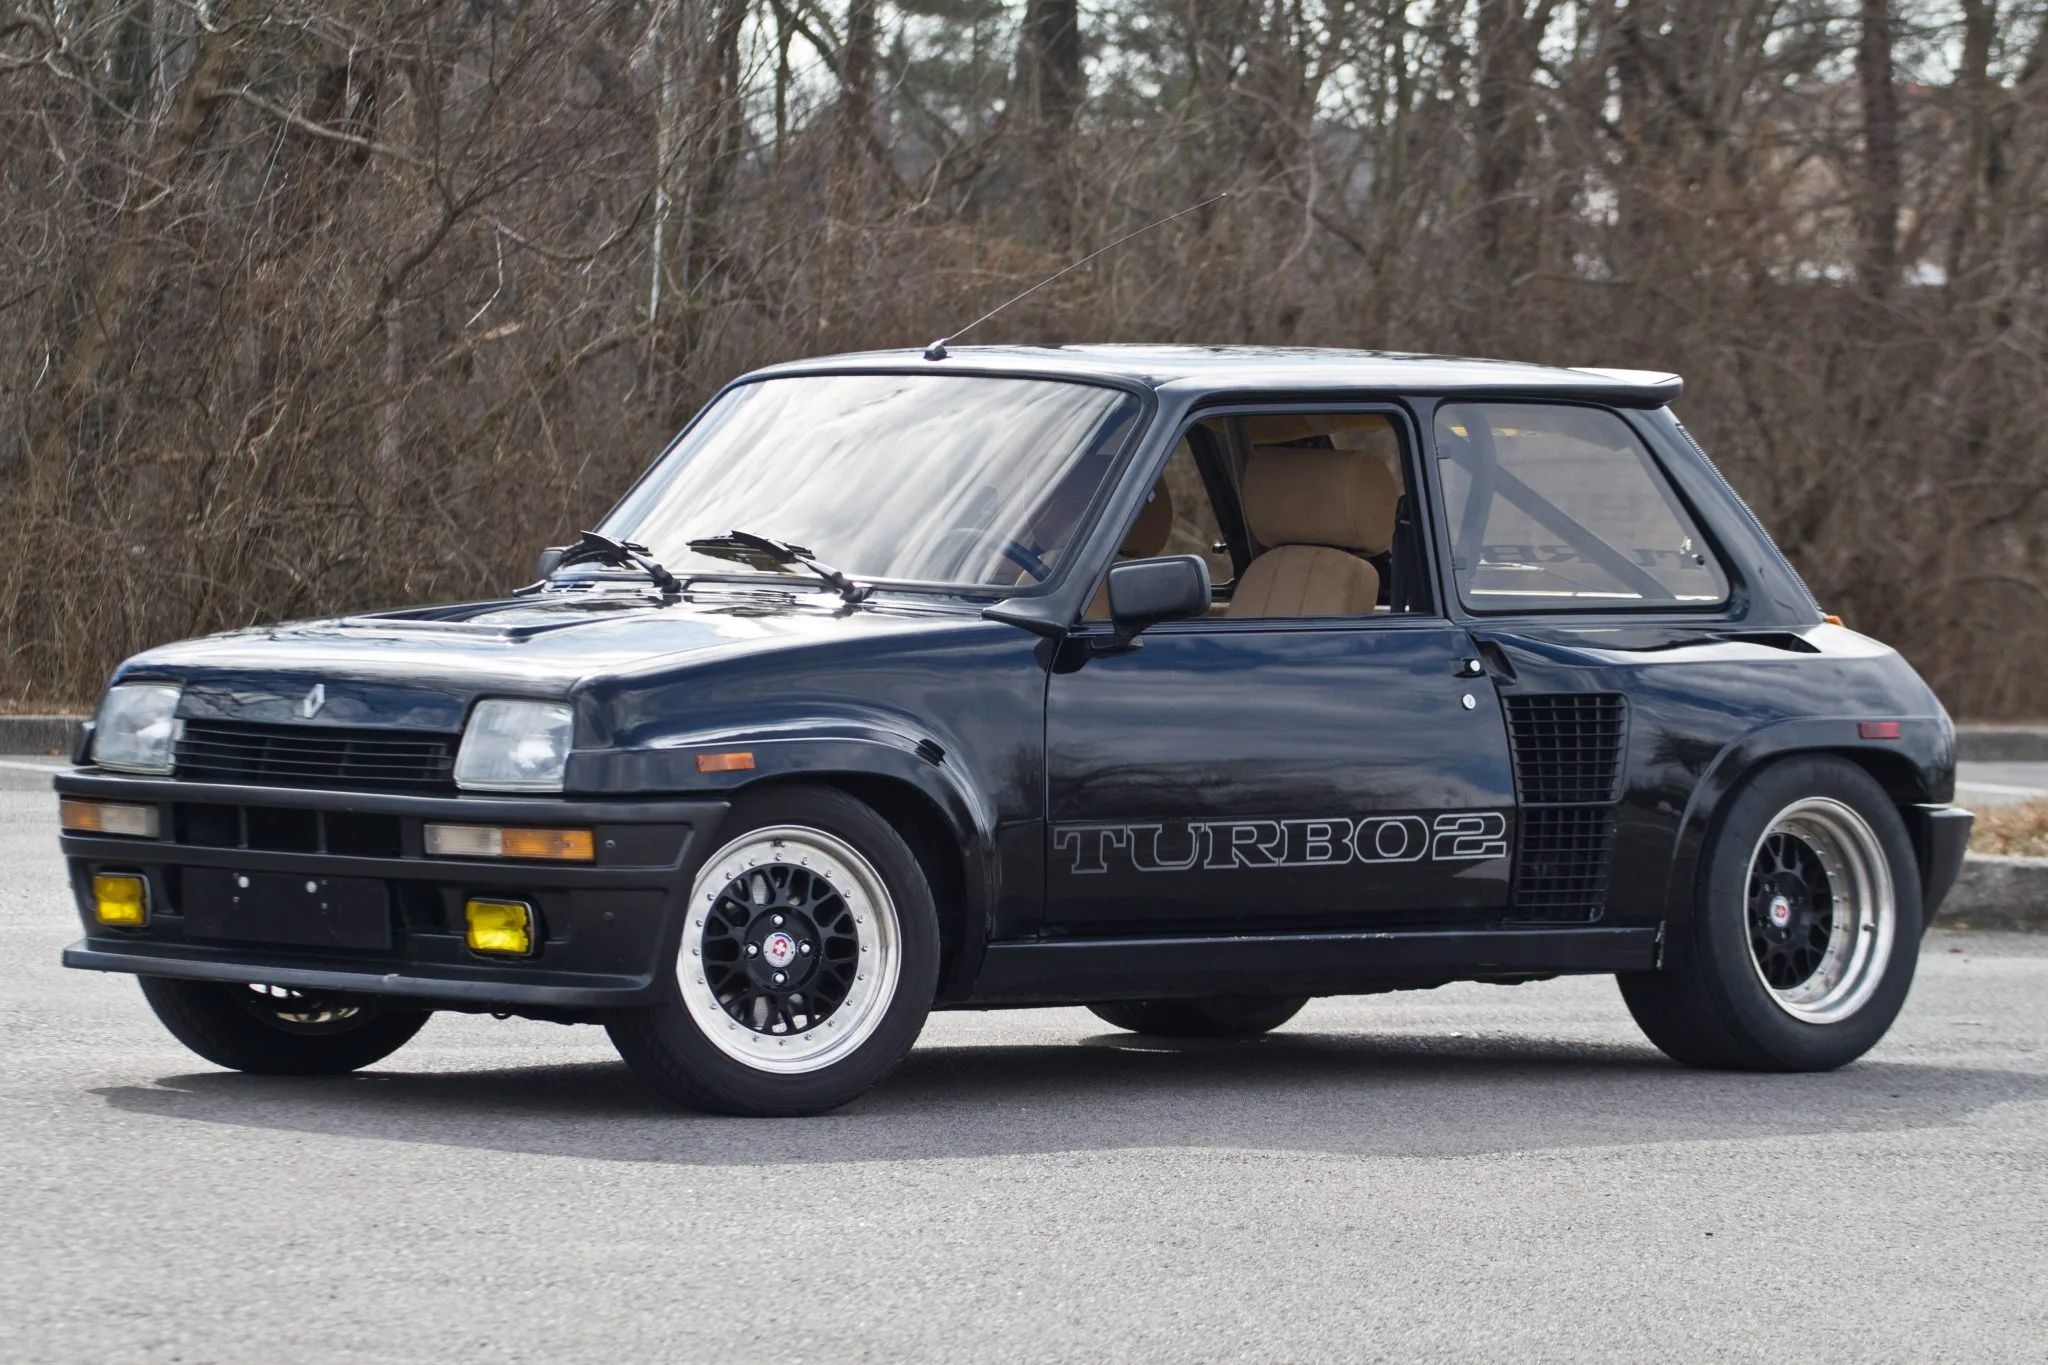 1985 Renault R5 Turbo II Is Our Bring a Trailer Auction Pick of